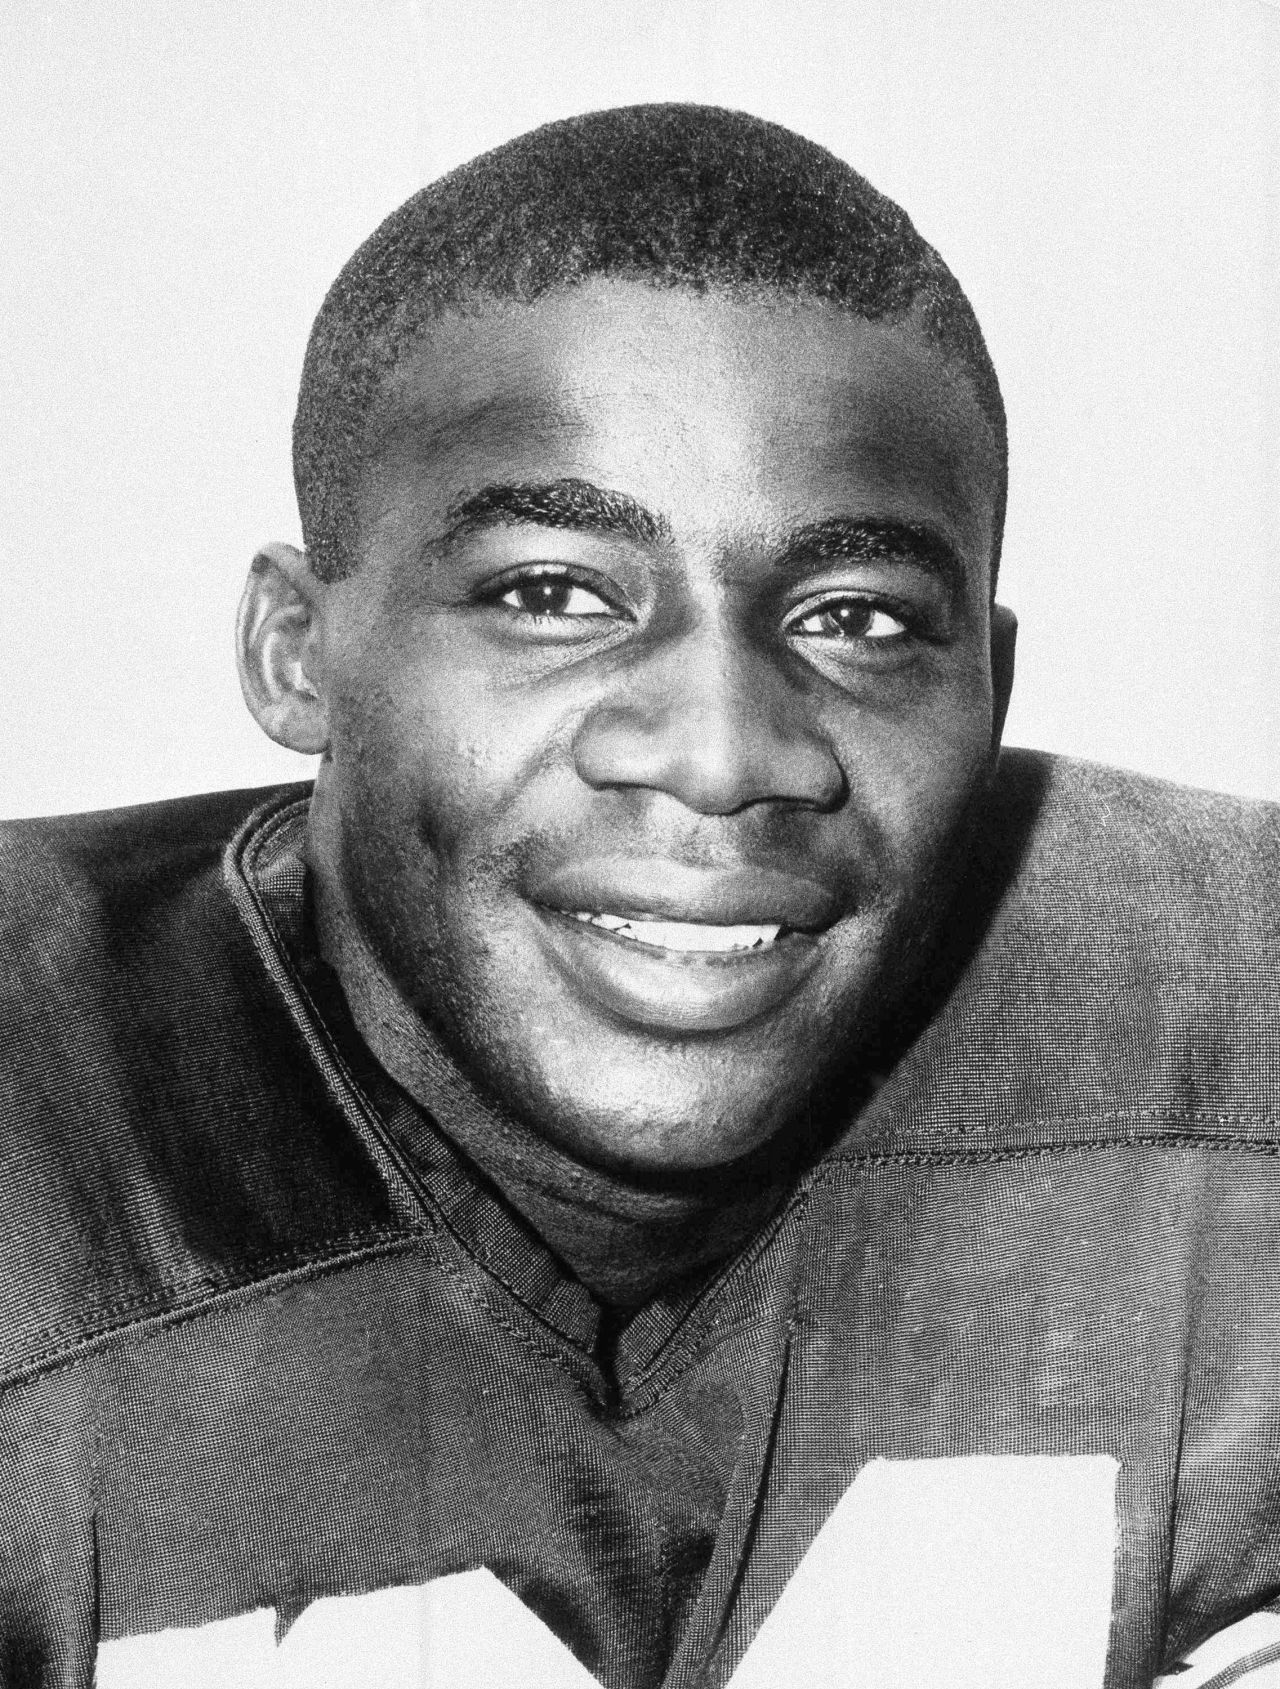 <a href="https://www.cnn.com/2020/02/04/sport/packers-football-player-willie-wood-death/index.html" target="_blank">Willie Wood</a>, a Hall of Fame football player and former safety for the Green Bay Packers, died February 3 at the age of 83, according to a statement from the team. Wood won two Super Bowls as a member of the Packers.